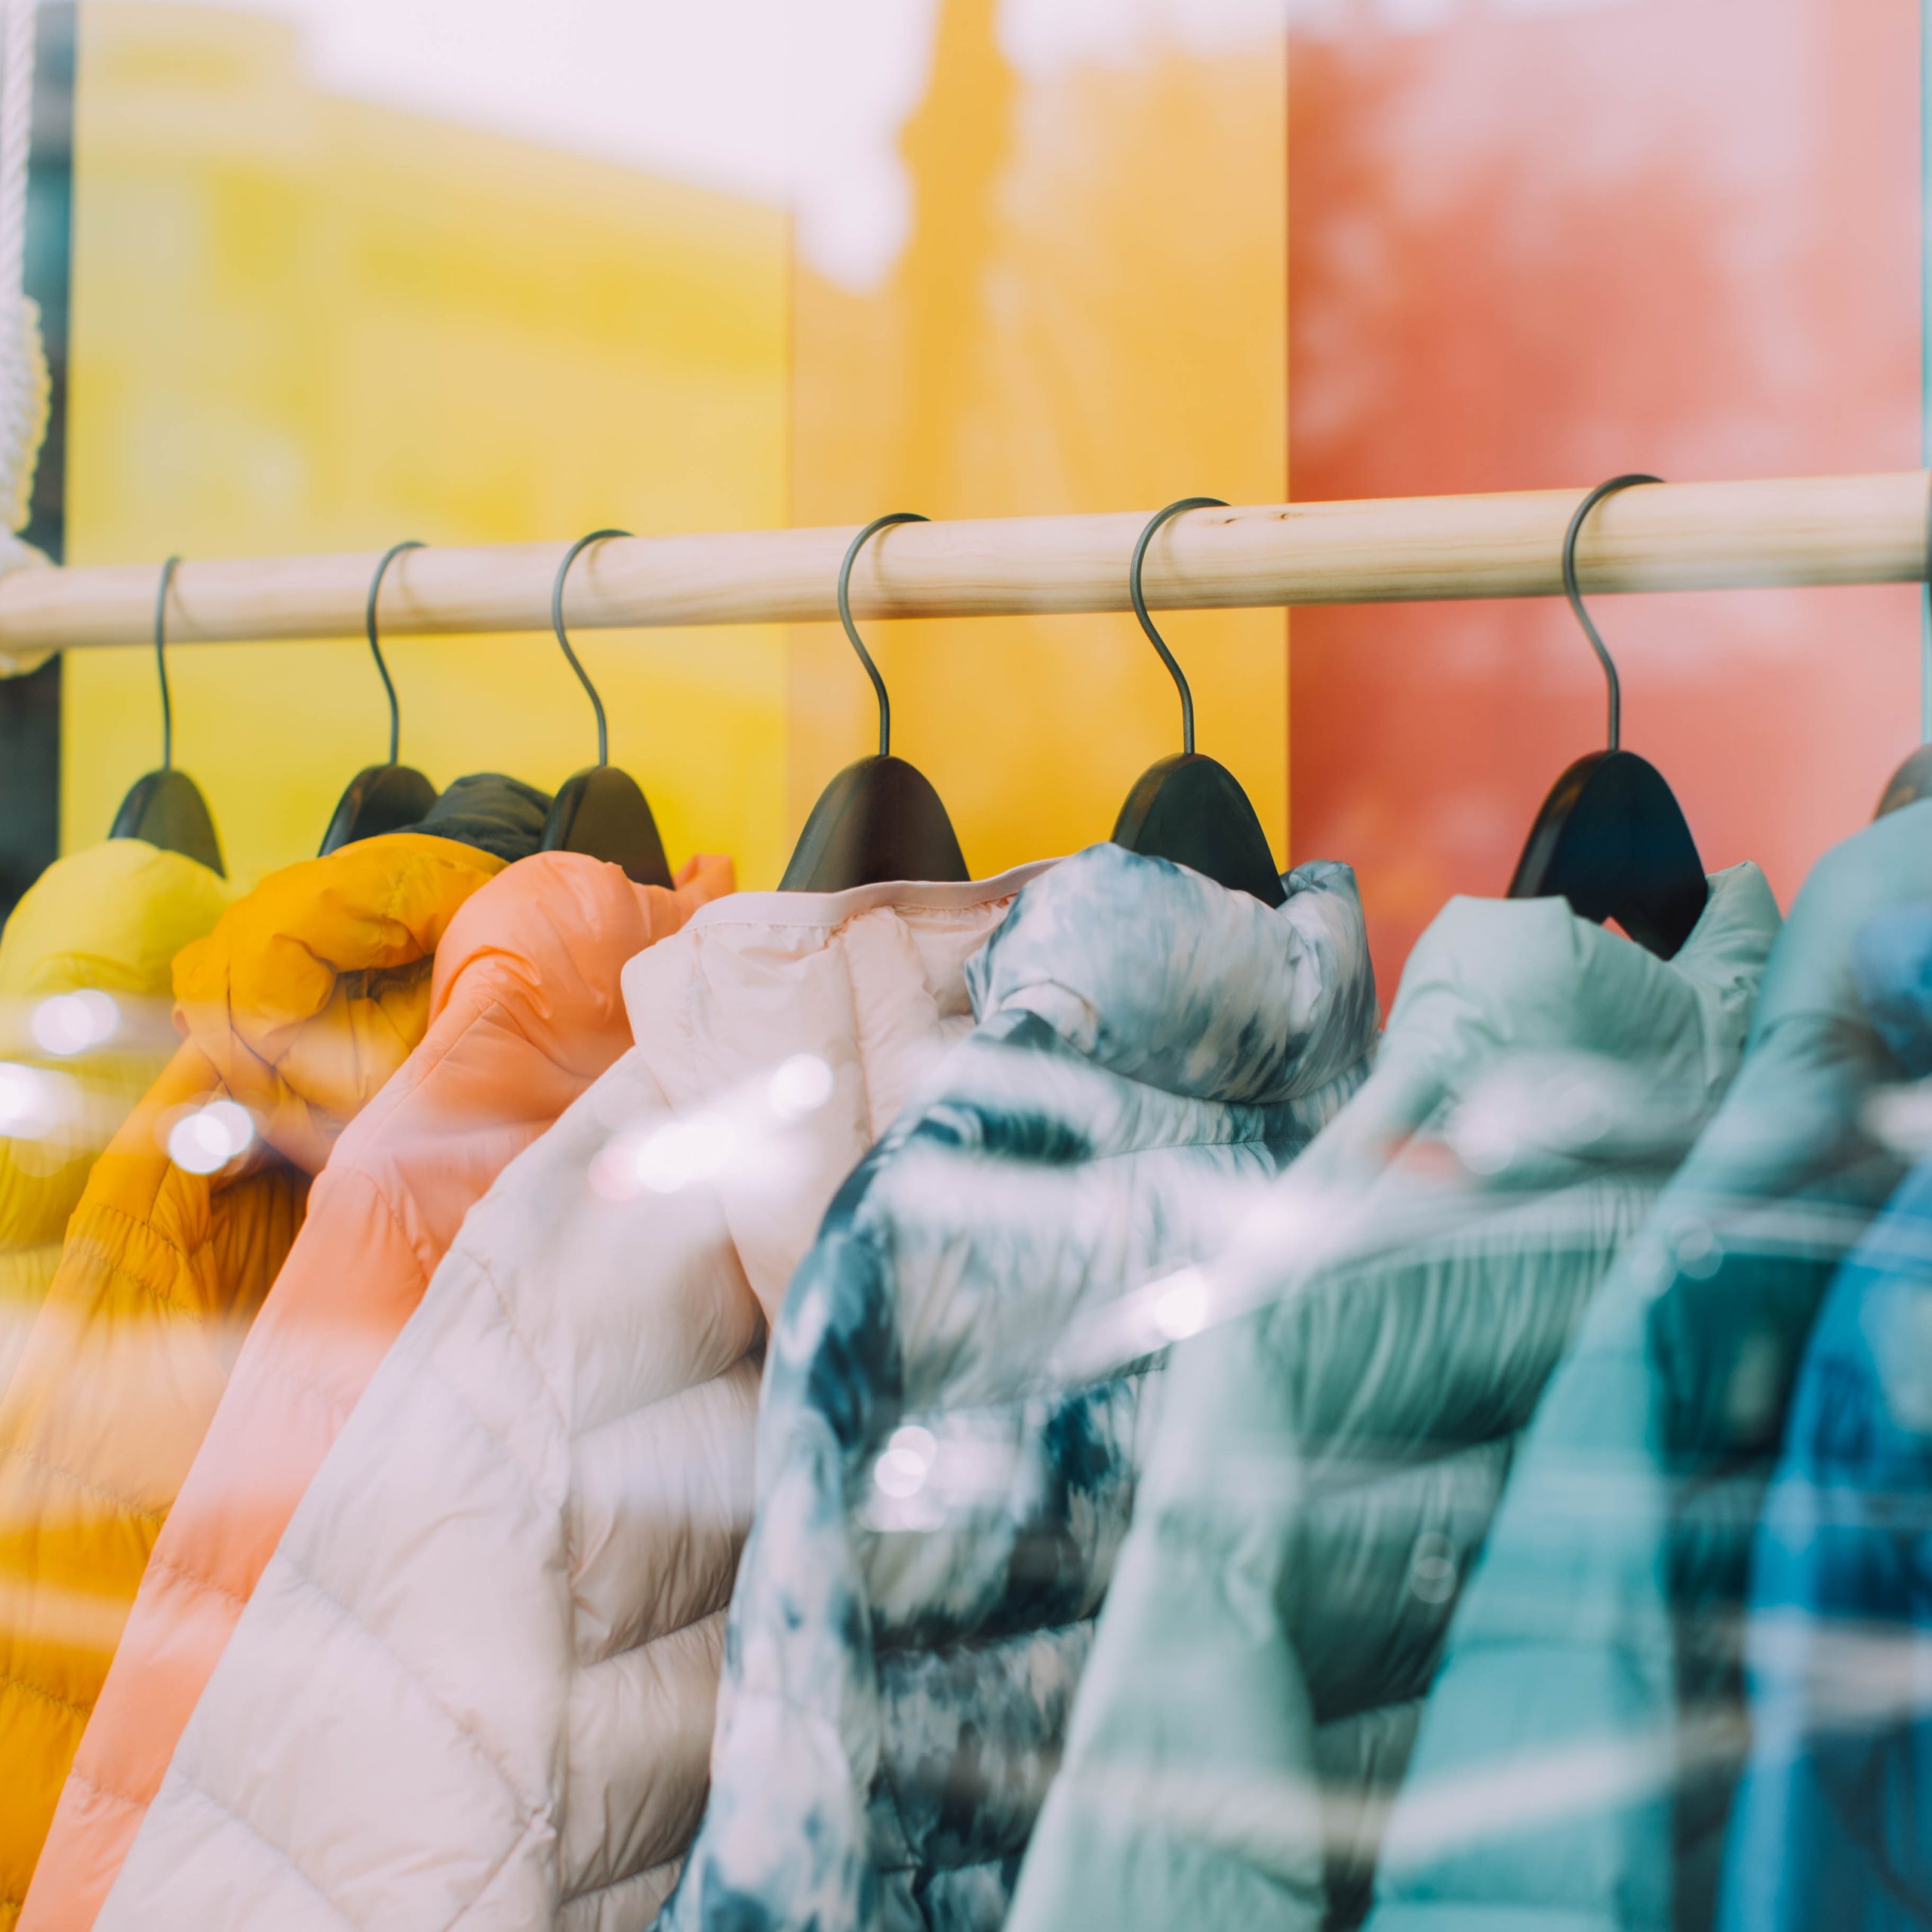 Online clothing sales to overtake in-store in 2022